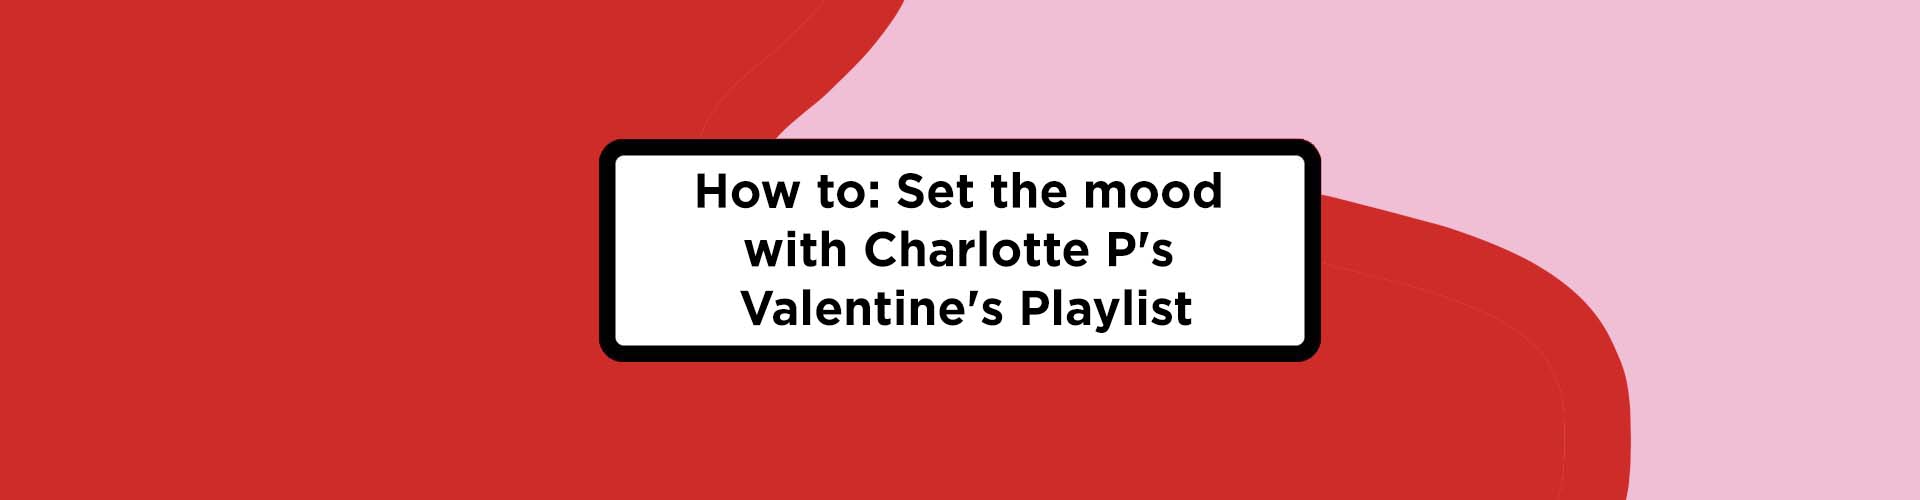 How to: Set the mood with Charlotte P's Valentine's Playlist